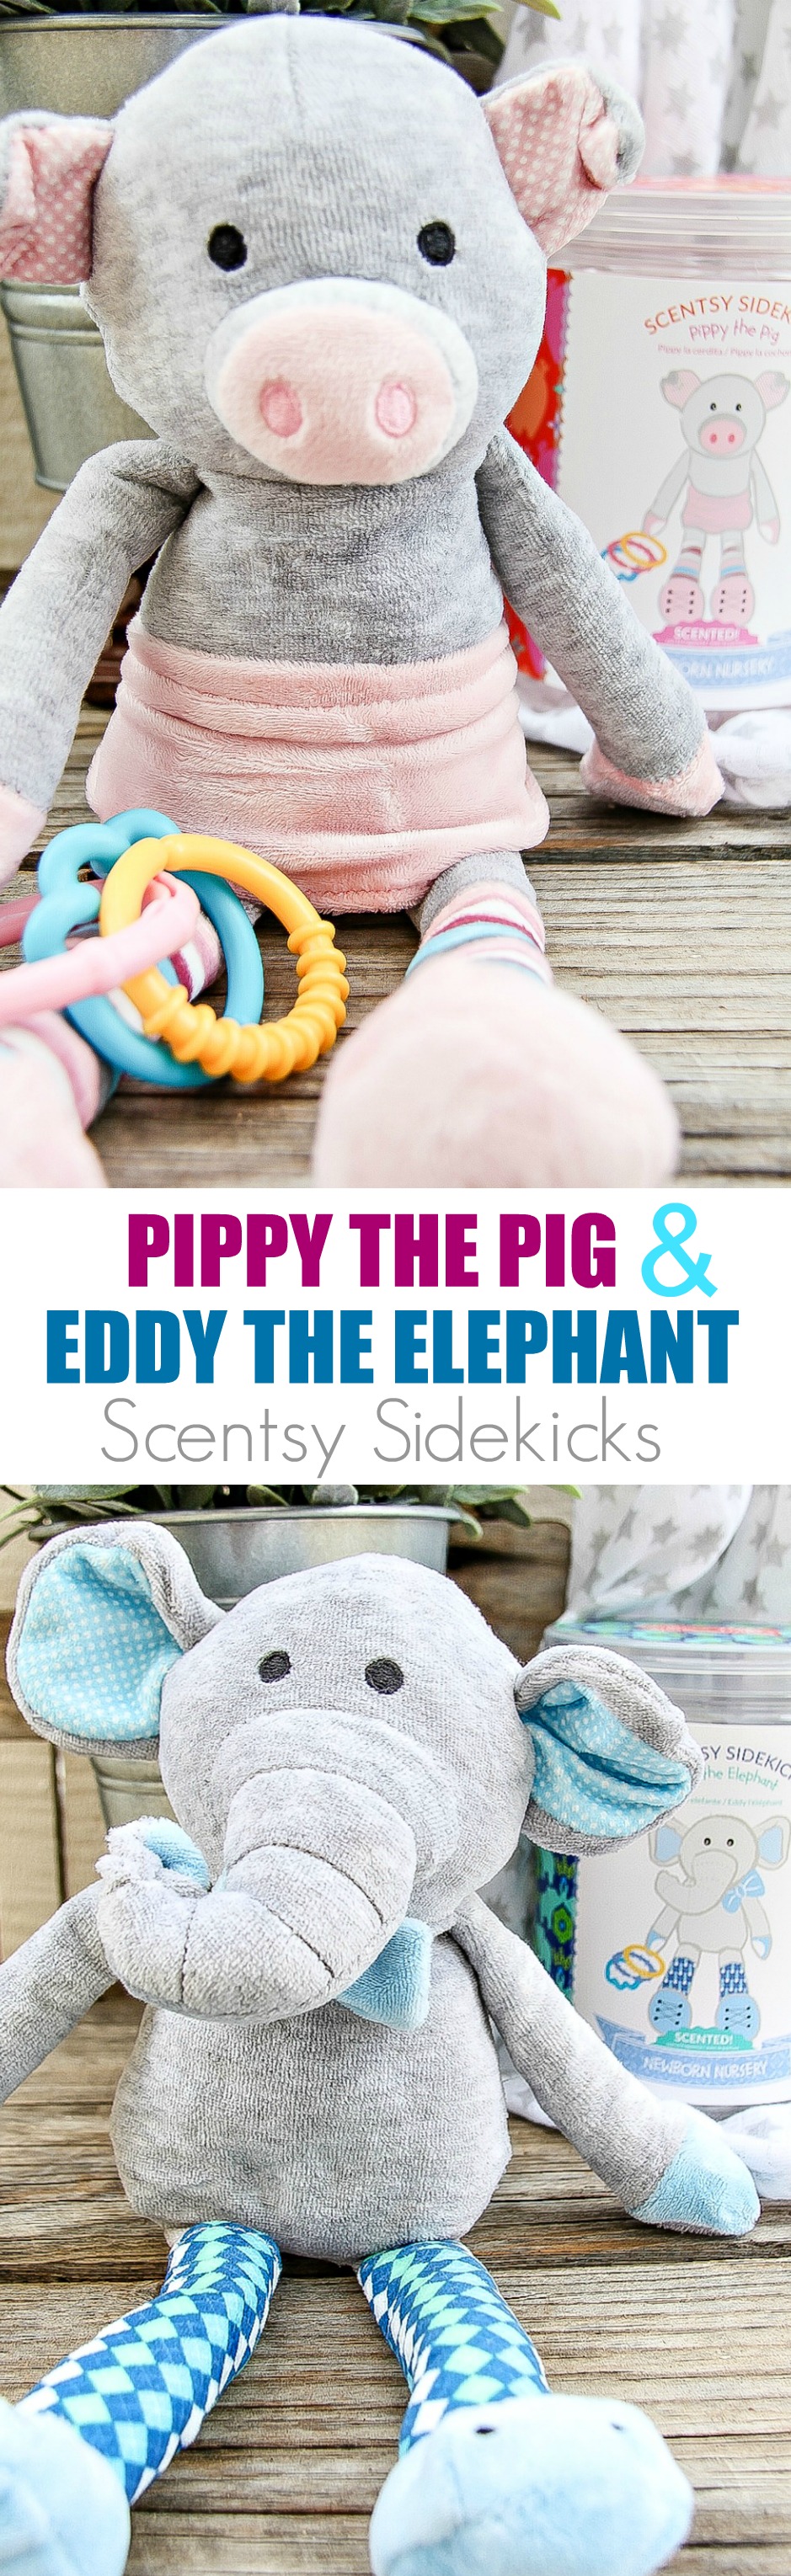 pippy-the-pig-and-eddy-the-elephant-scentsy-sidekicks-make-great-baby-shower-and-1st-birthday-gifts